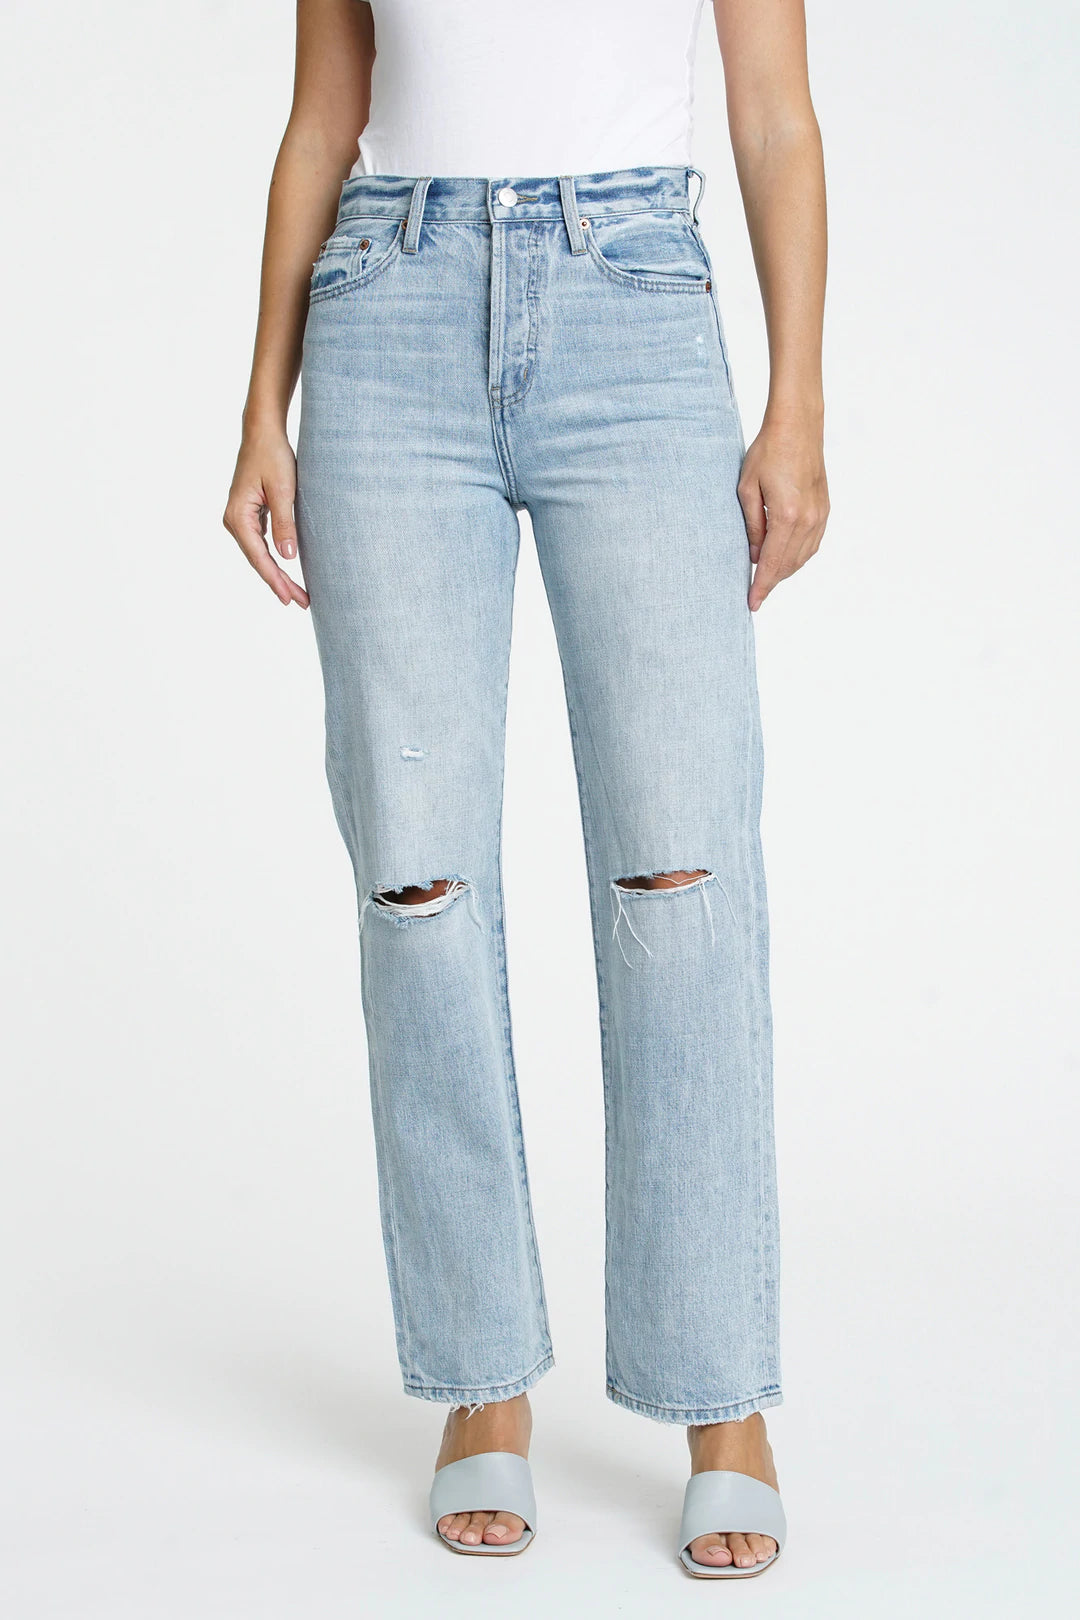 Cassie Super High Rise Jean in By My Side